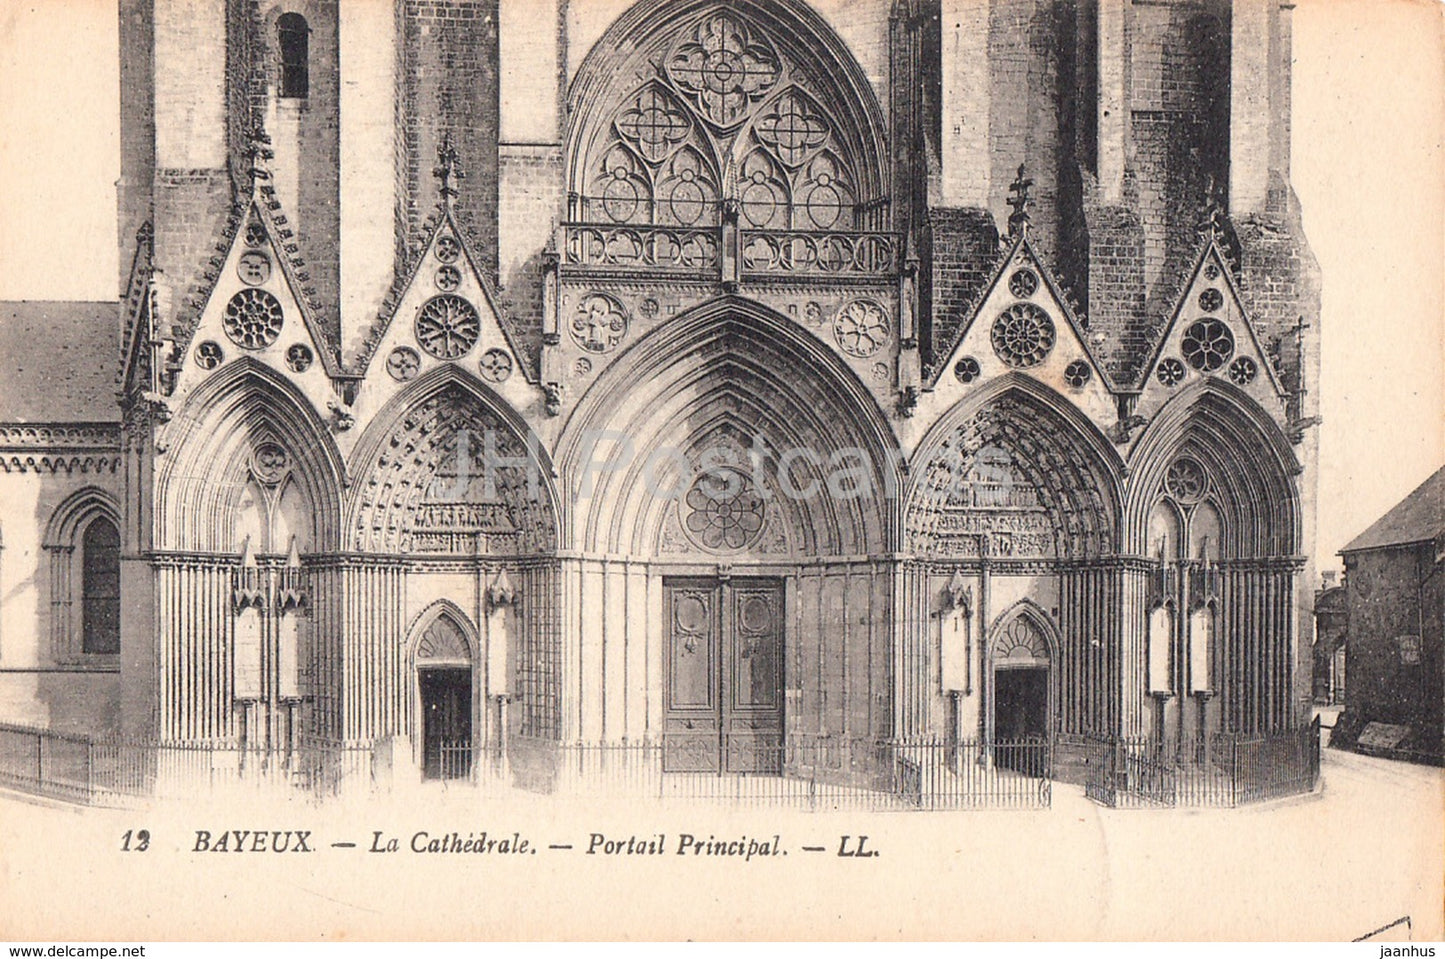 Bayeux - La Cathedrale - Portail Principal - 12 - cathedral - old postcard - France - unused